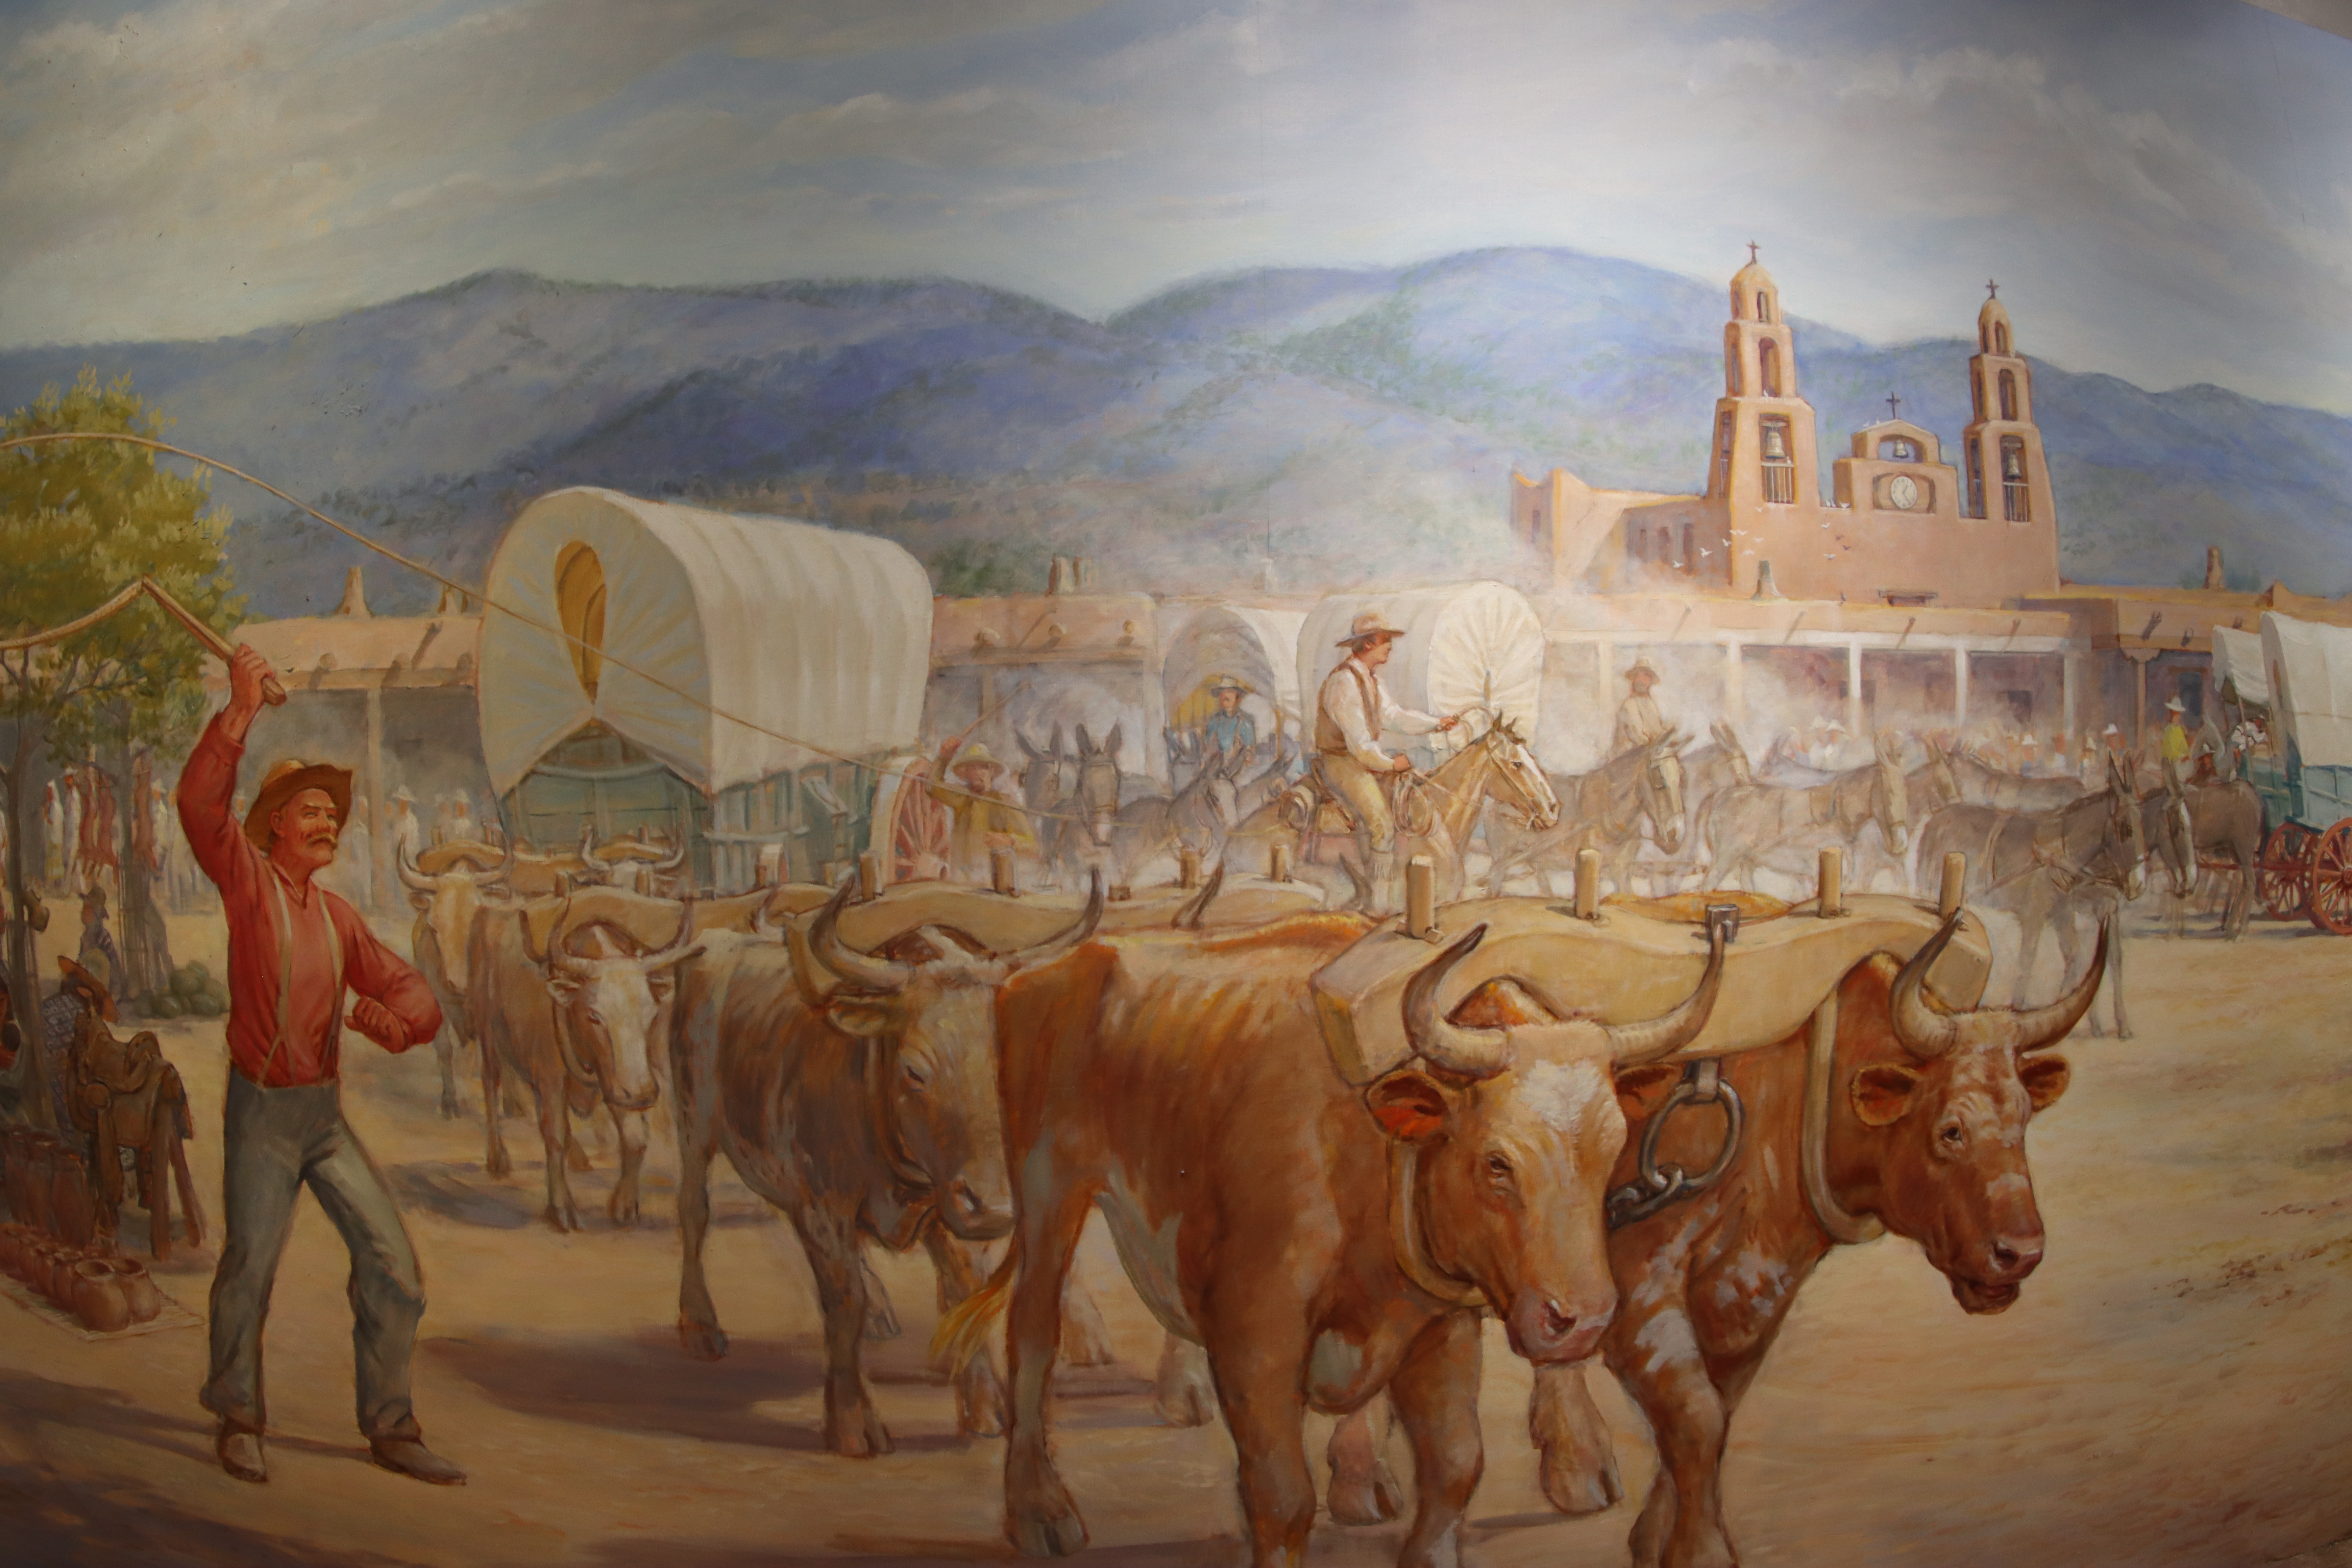 Image of a mural depicting pioneers heading west with oxen pulling a covered wagon on a dirt road and activity behind them. 